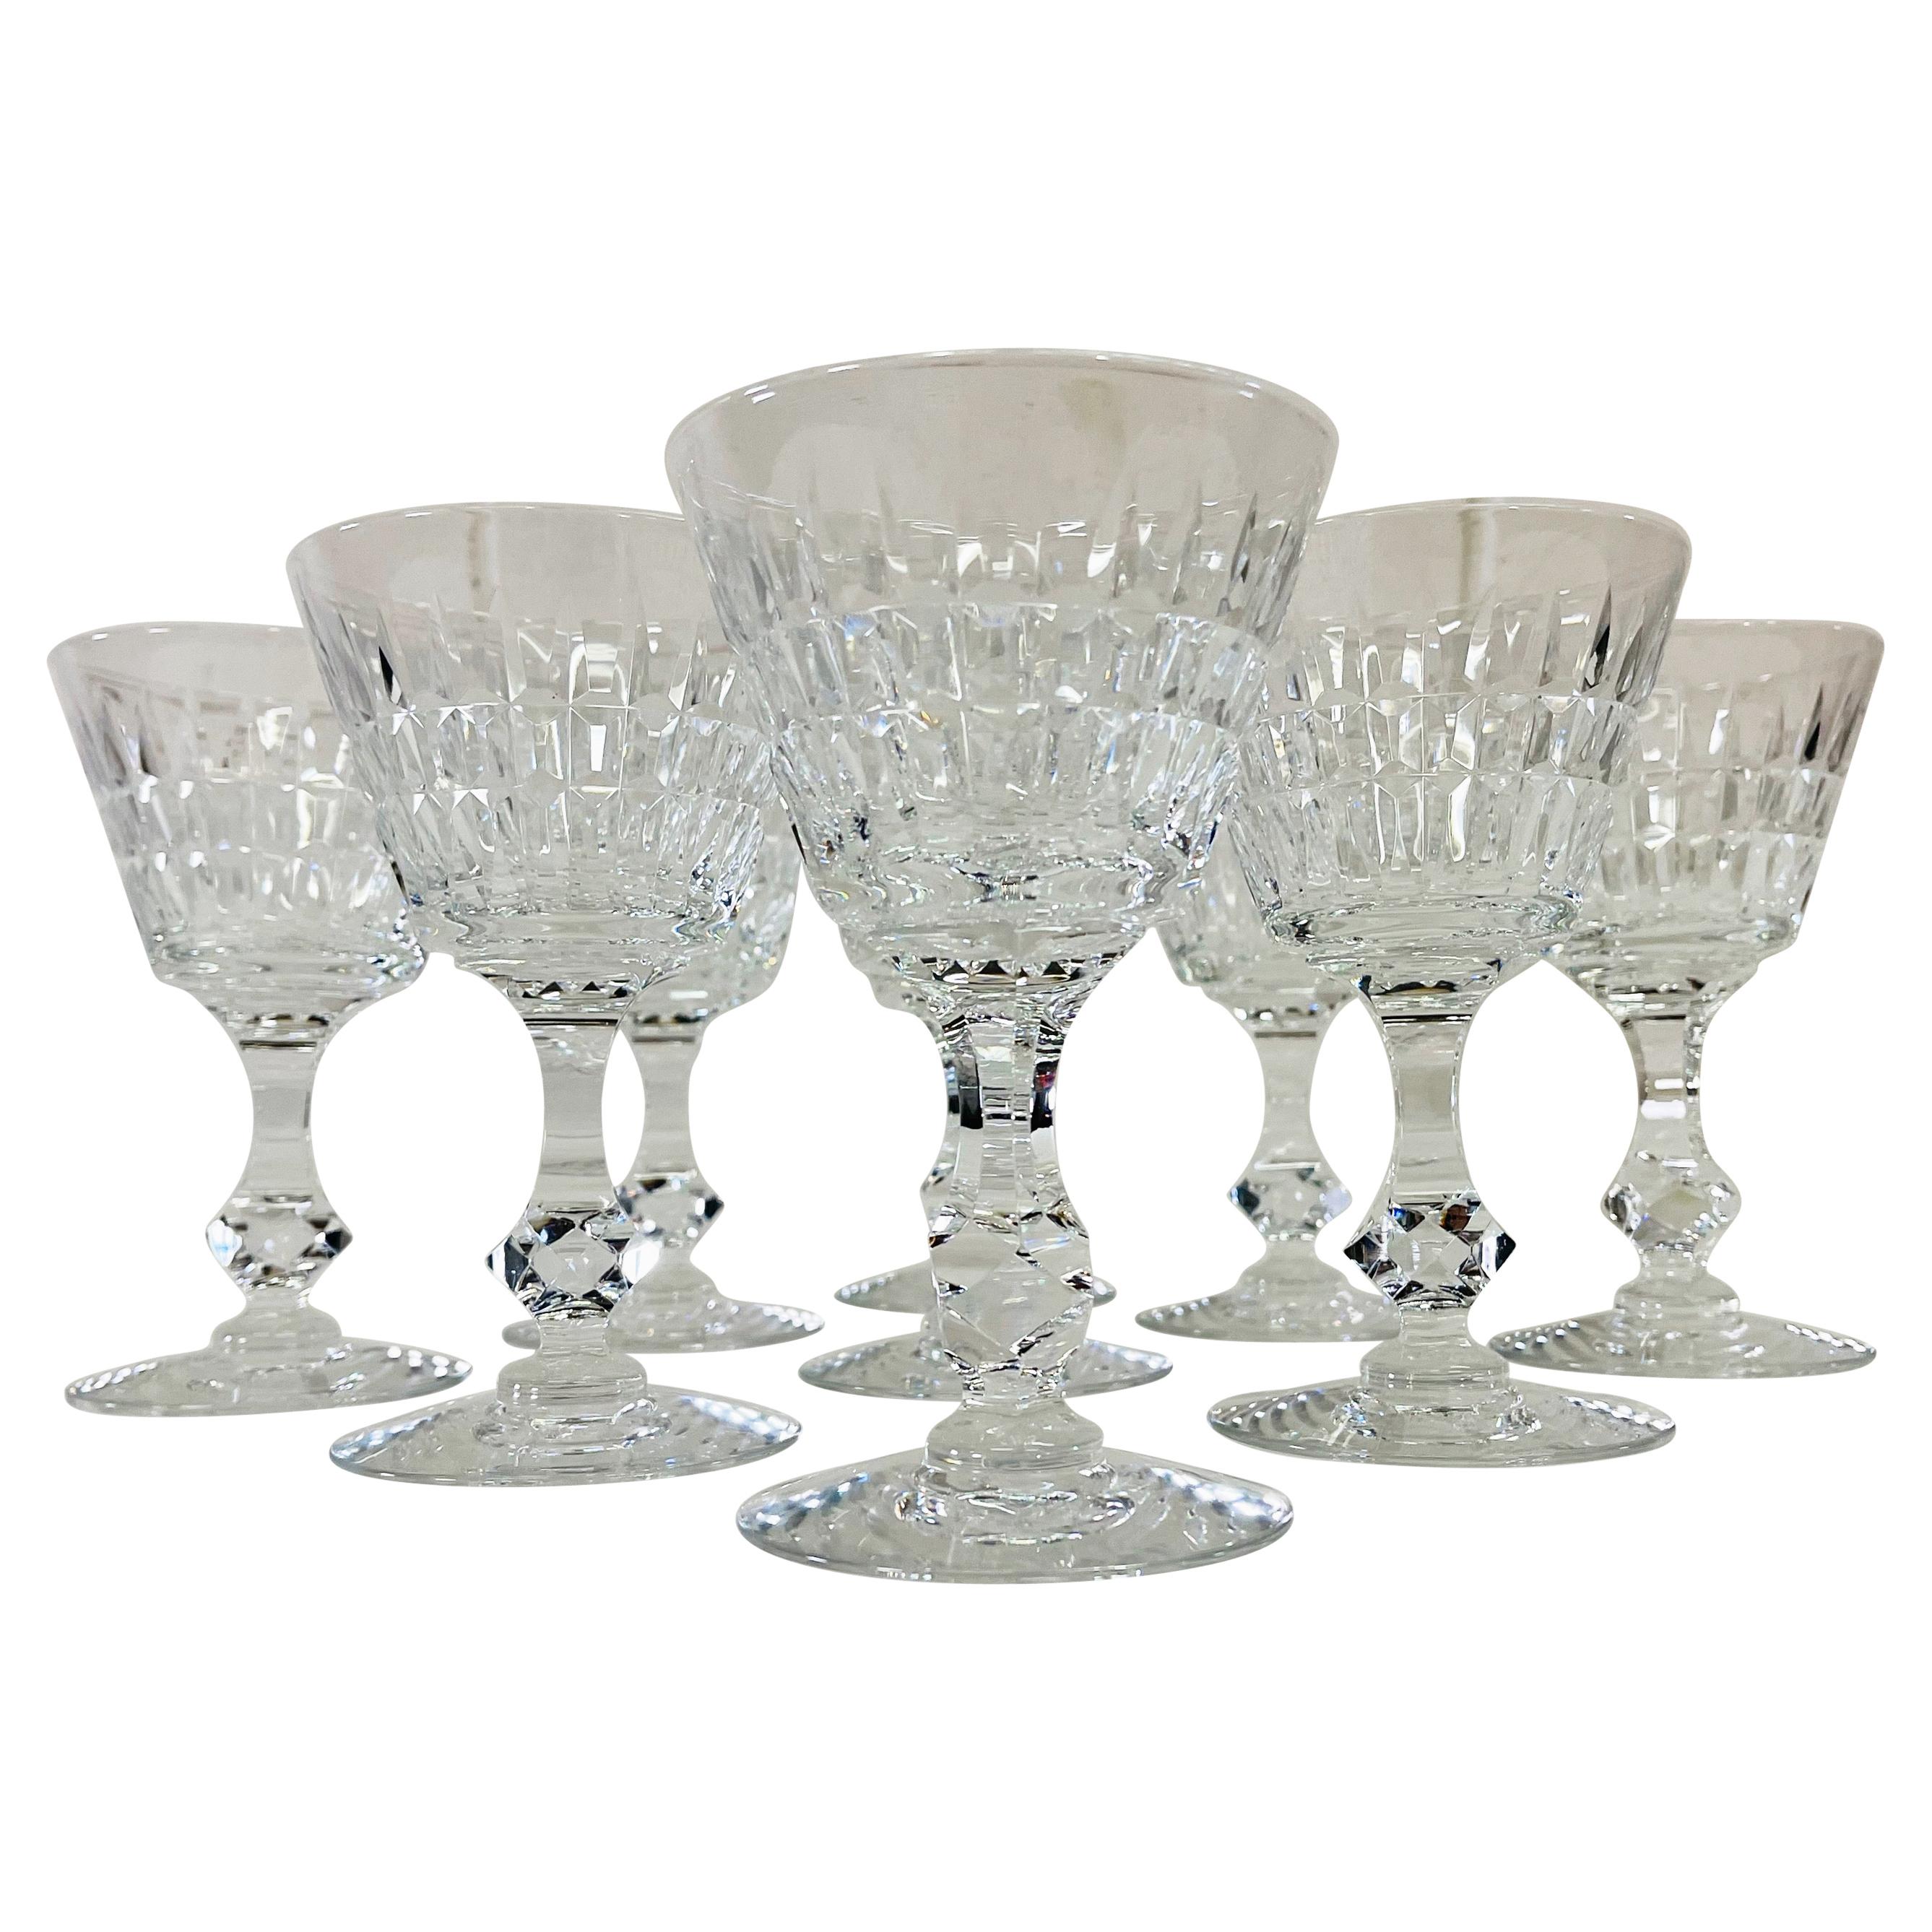 1960s Mitred Cut Crystal Glass Coupes, Set of 9